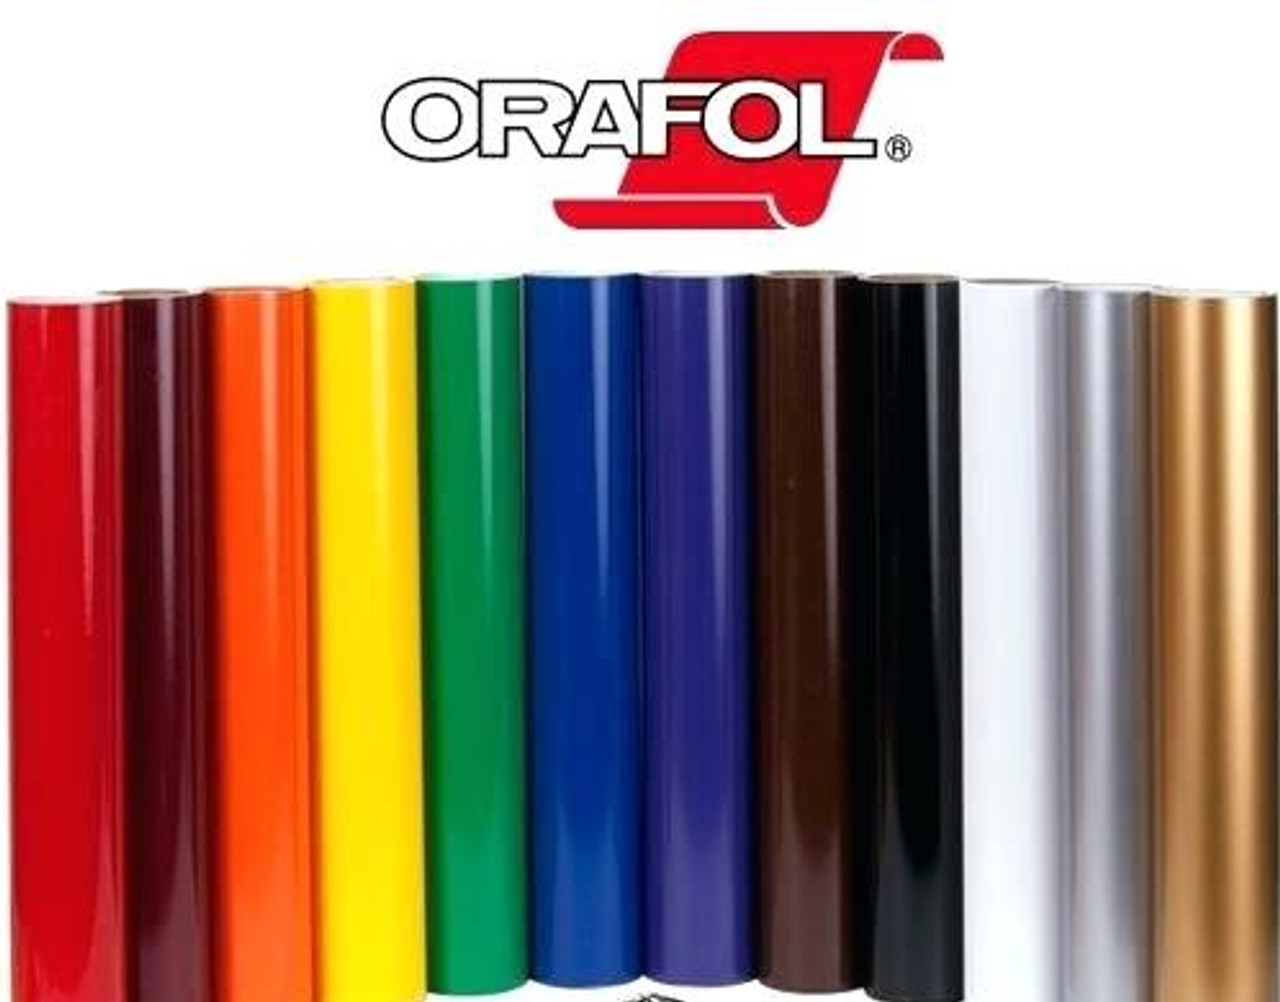 Oracal 651 Adhesive Vinyl in 12 By-The-Foot Rolls